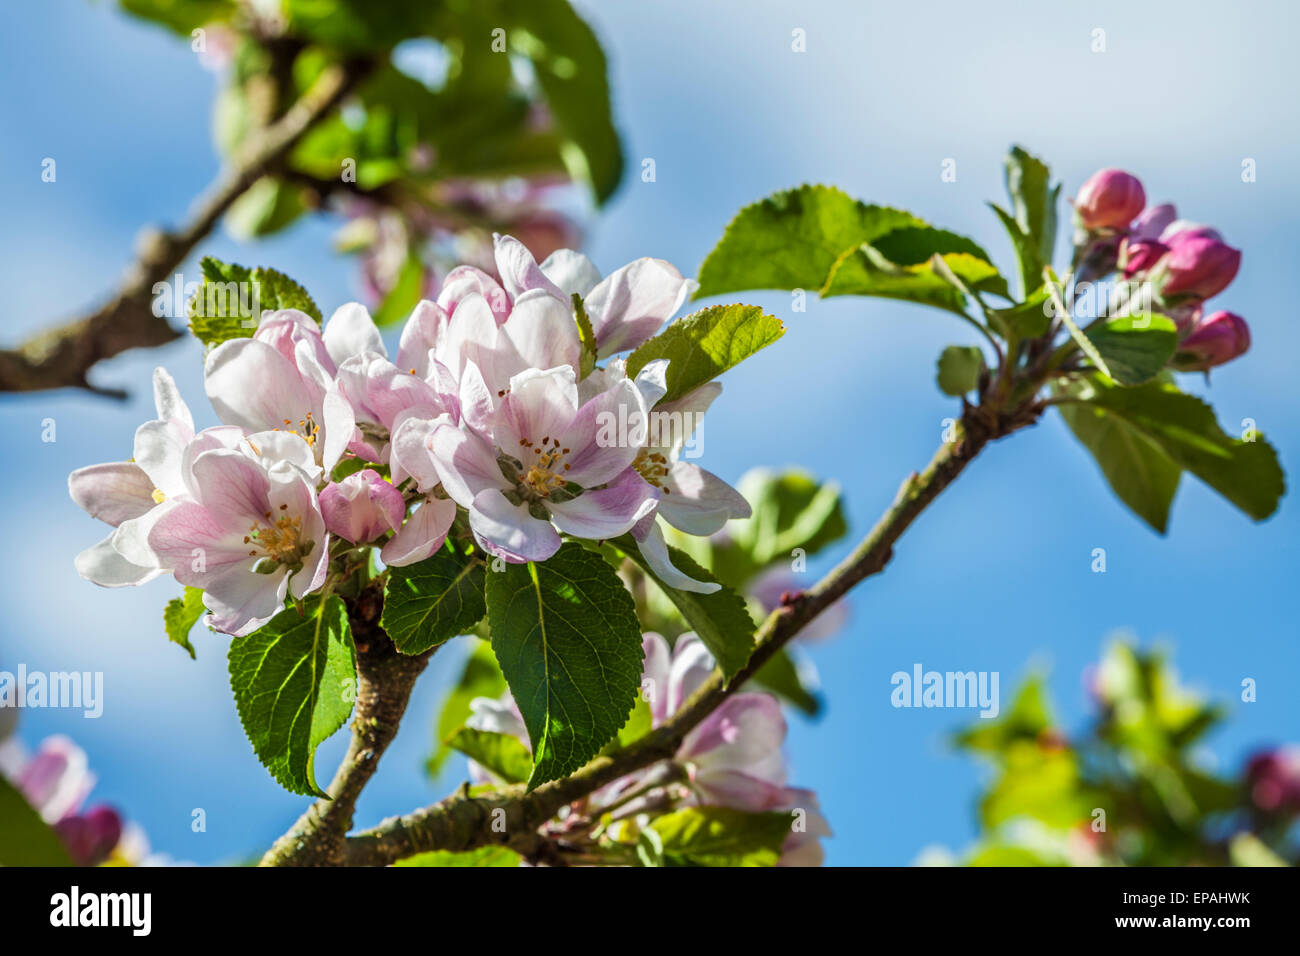 Blossoming apples trees in the wallled garden at Bowood House in Wiltshire. Stock Photo